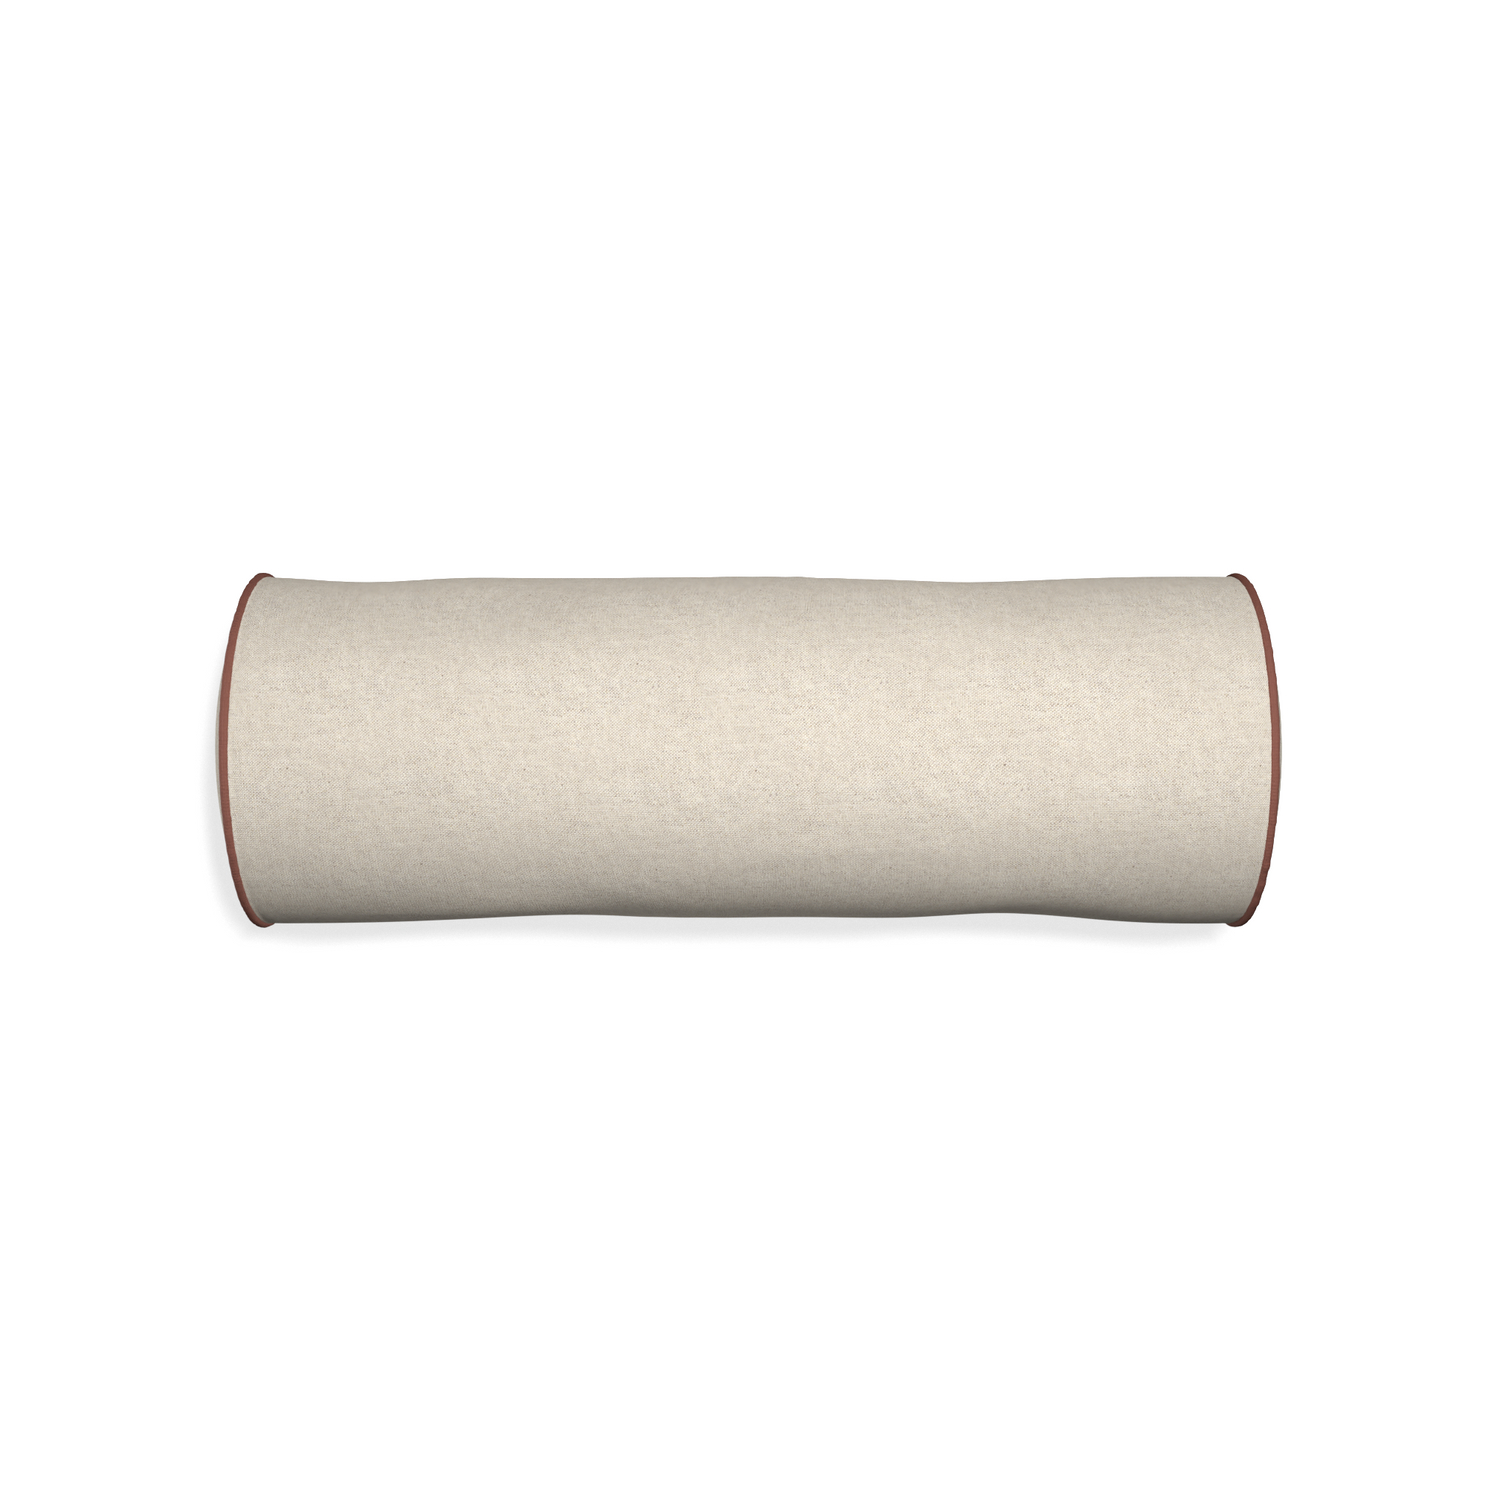 Bolster oat custom light brownpillow with w piping on white background